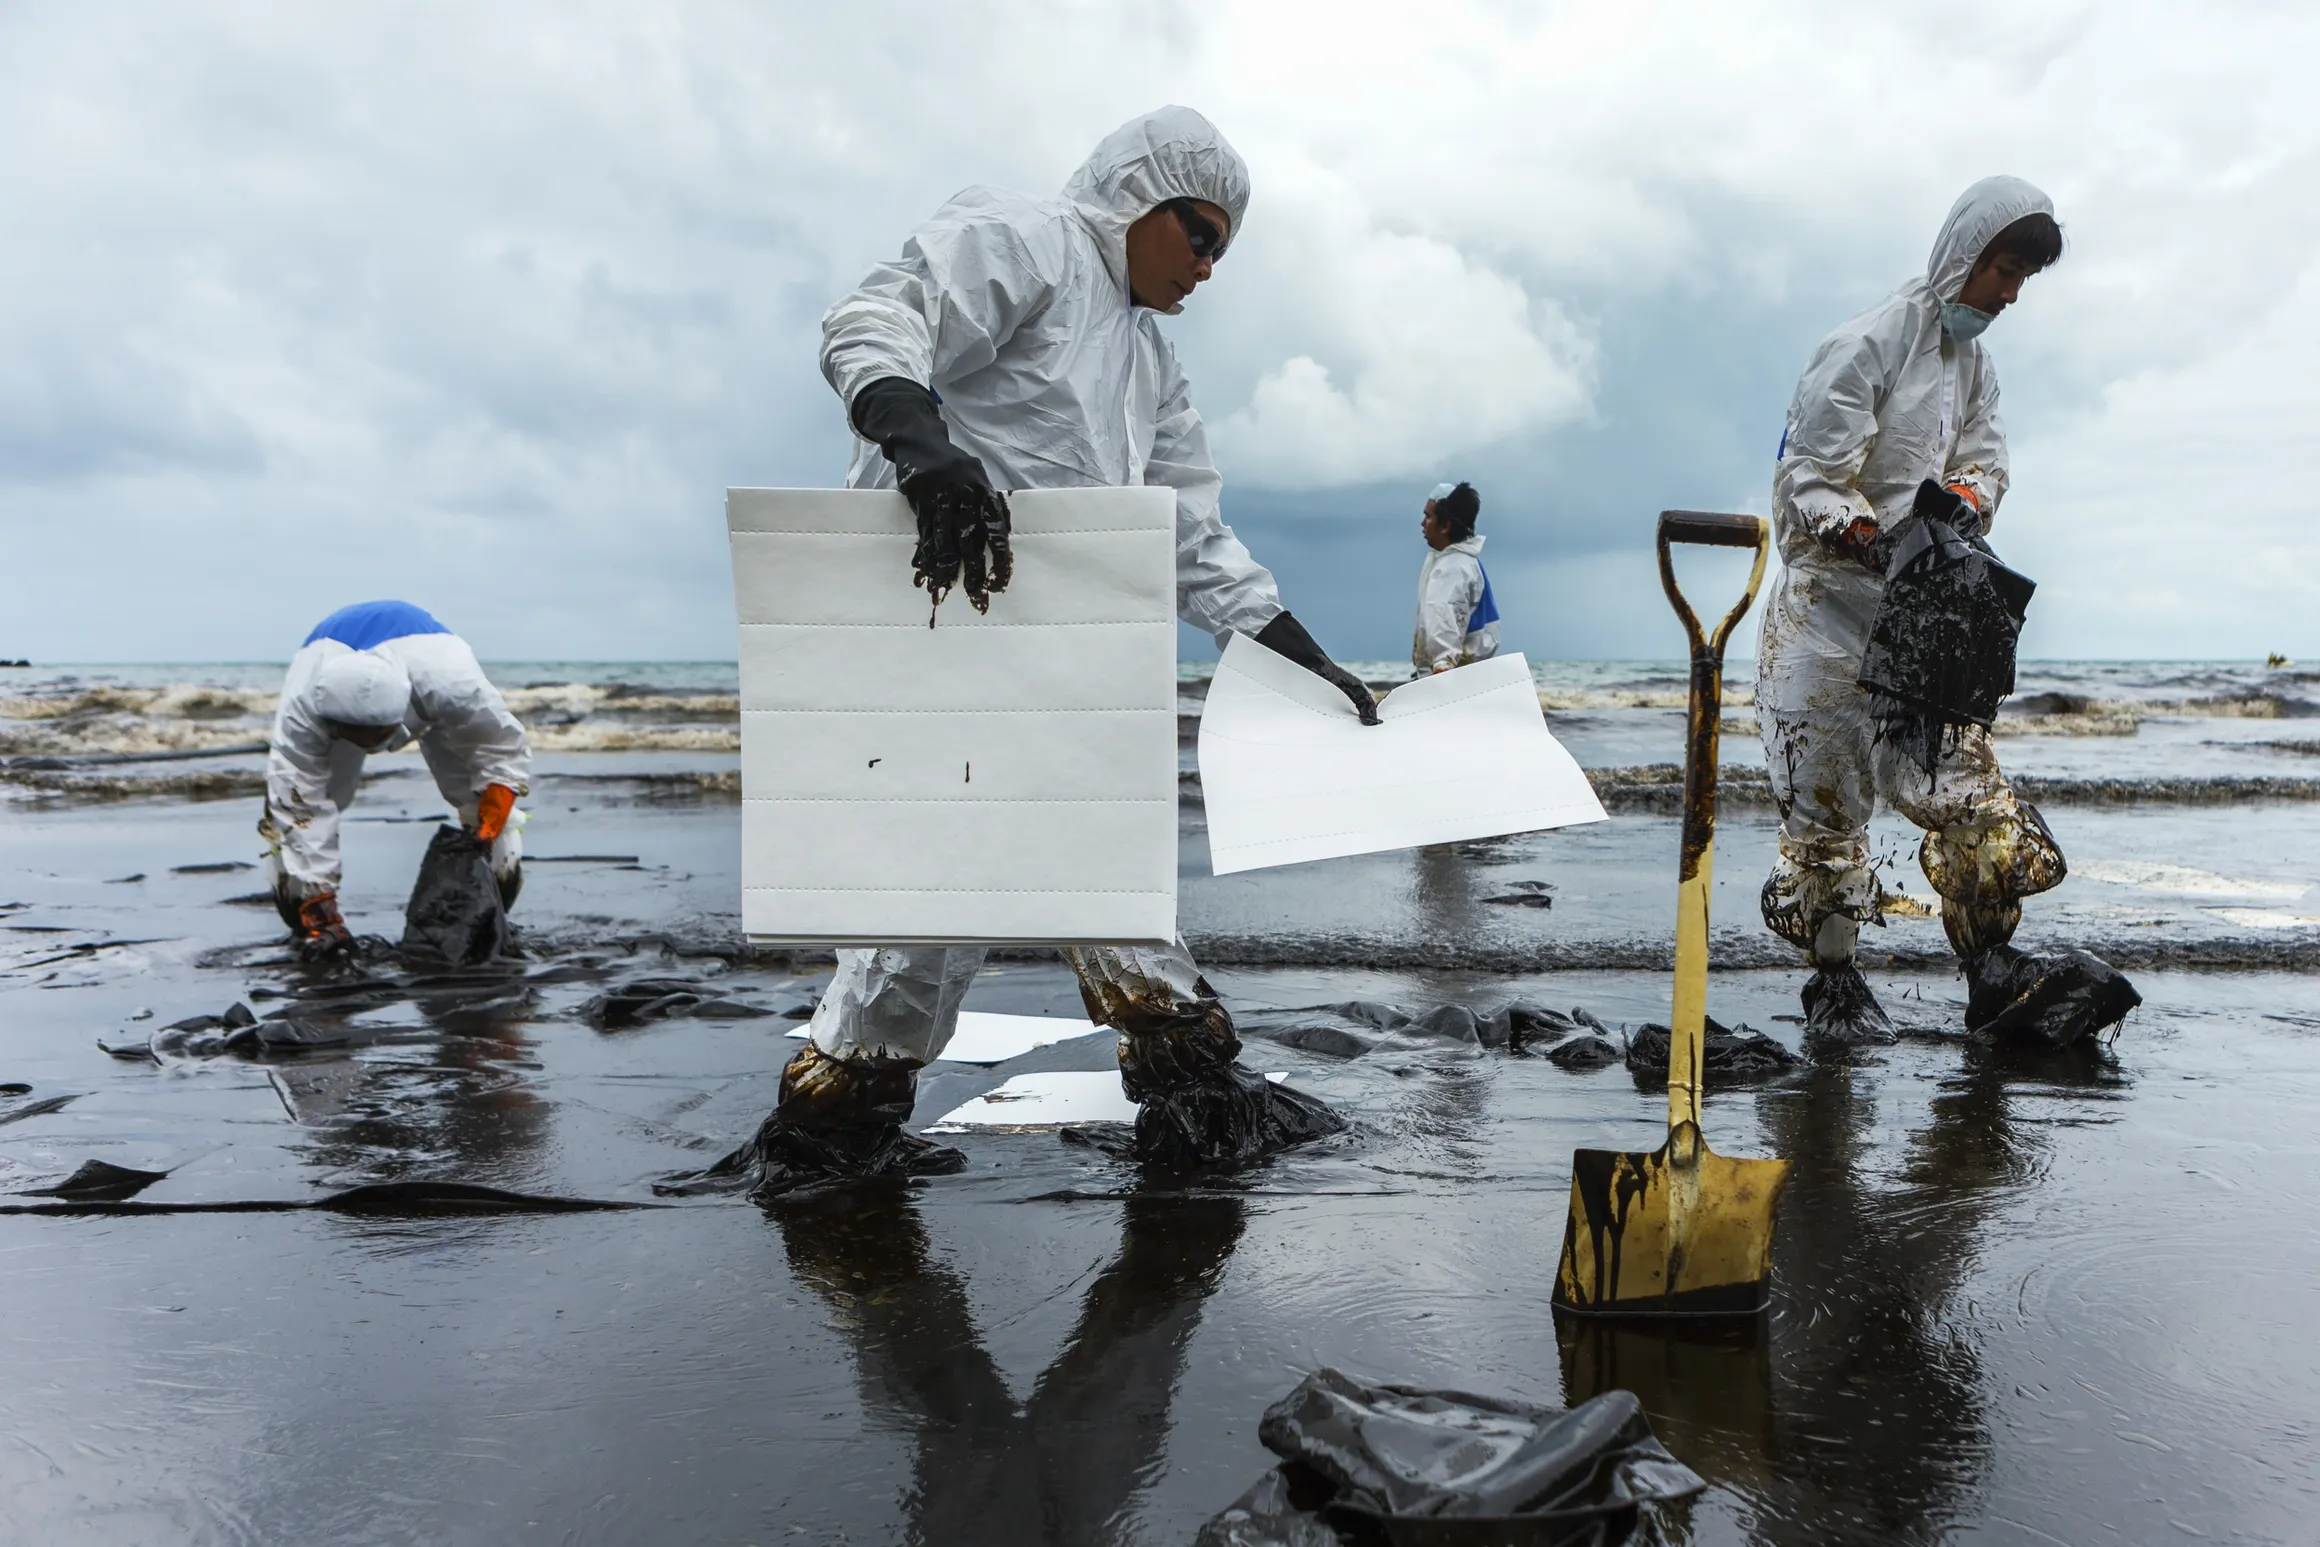 Workers-on-beach-using-industrial-clean-up-rags-to-clean-an-oil-spill